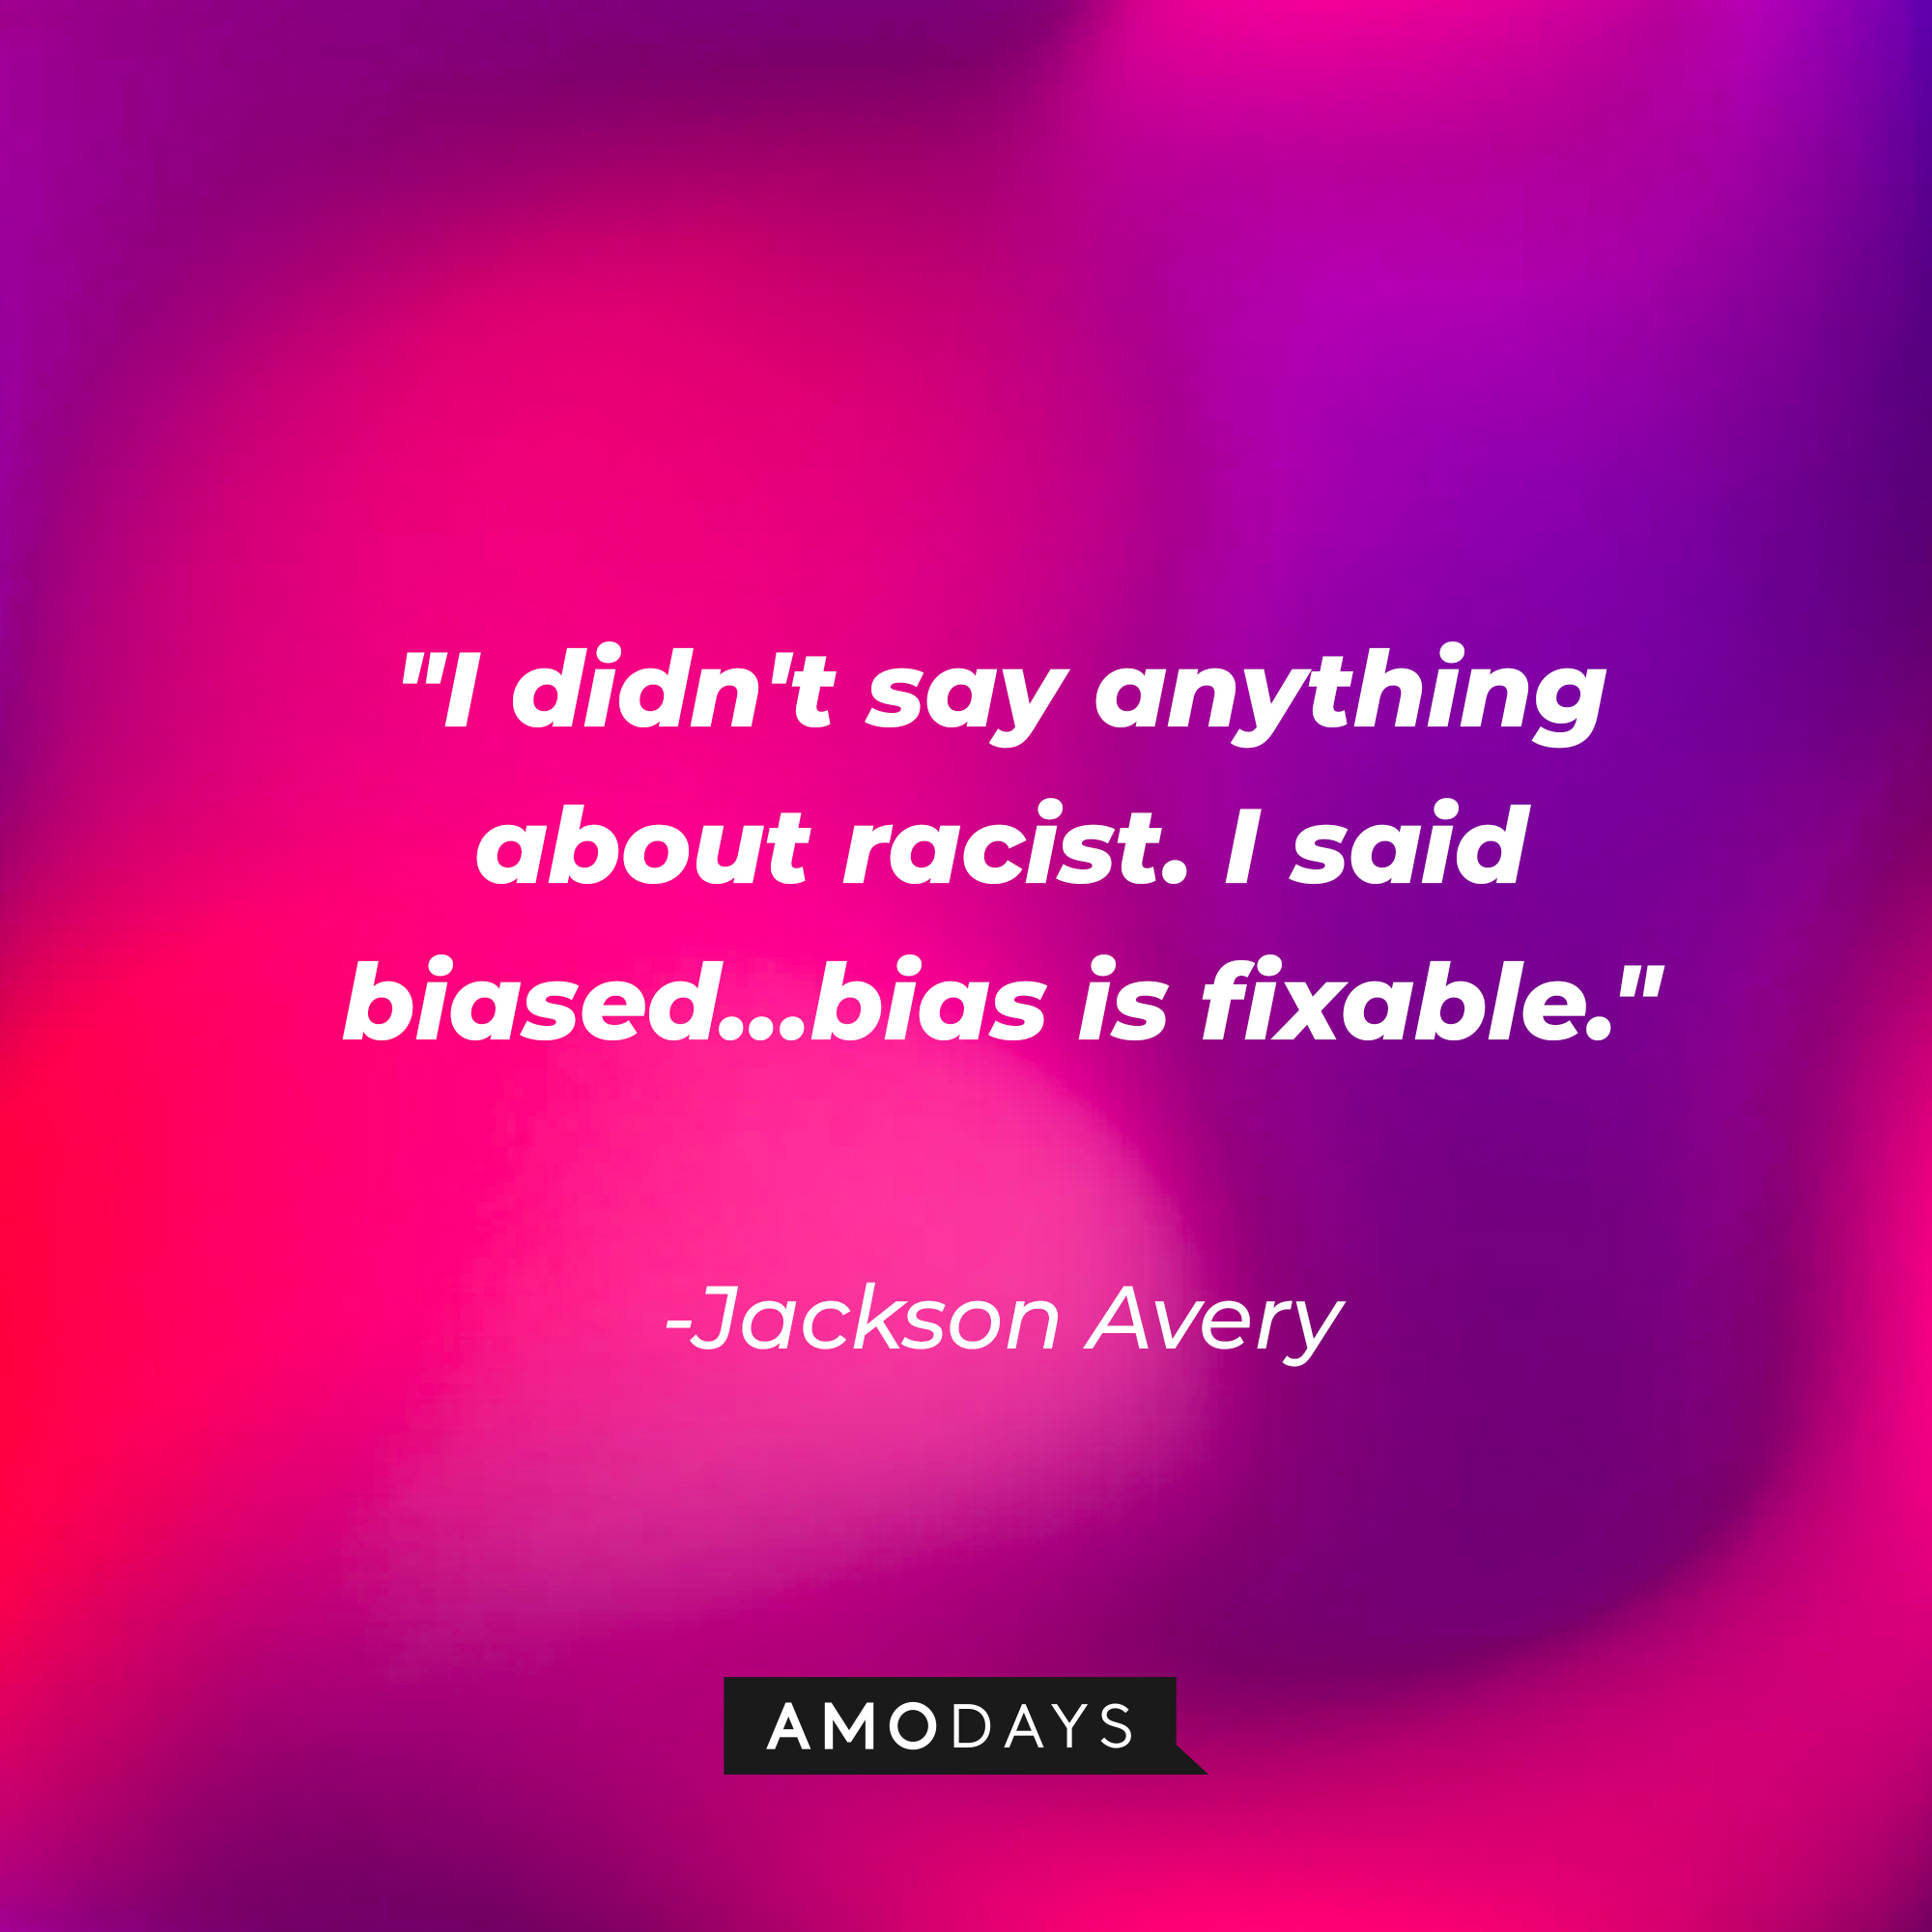 Jackson Avery’s quote: “I didn't say anything about racist. I said biased…bias is fixable.” |Source: AmoDays